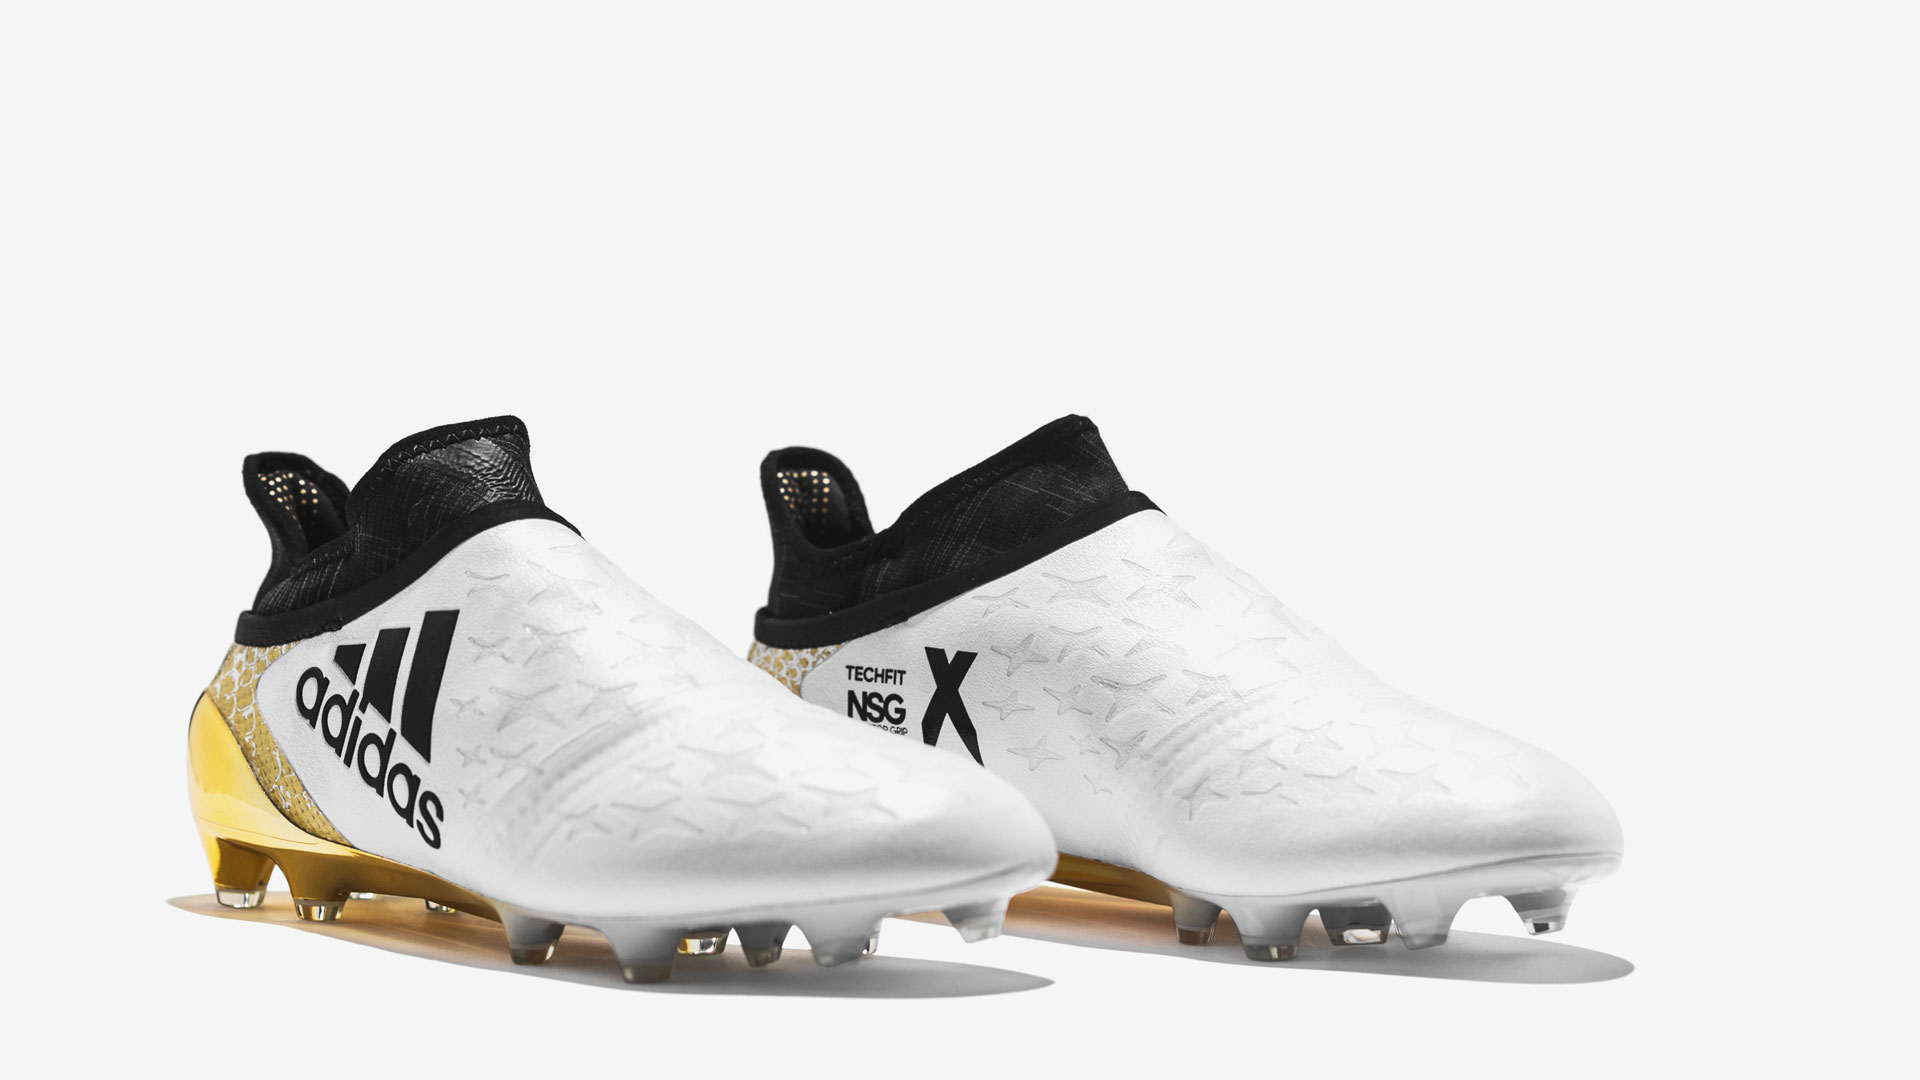 adidas x 16 purechaos white and gold